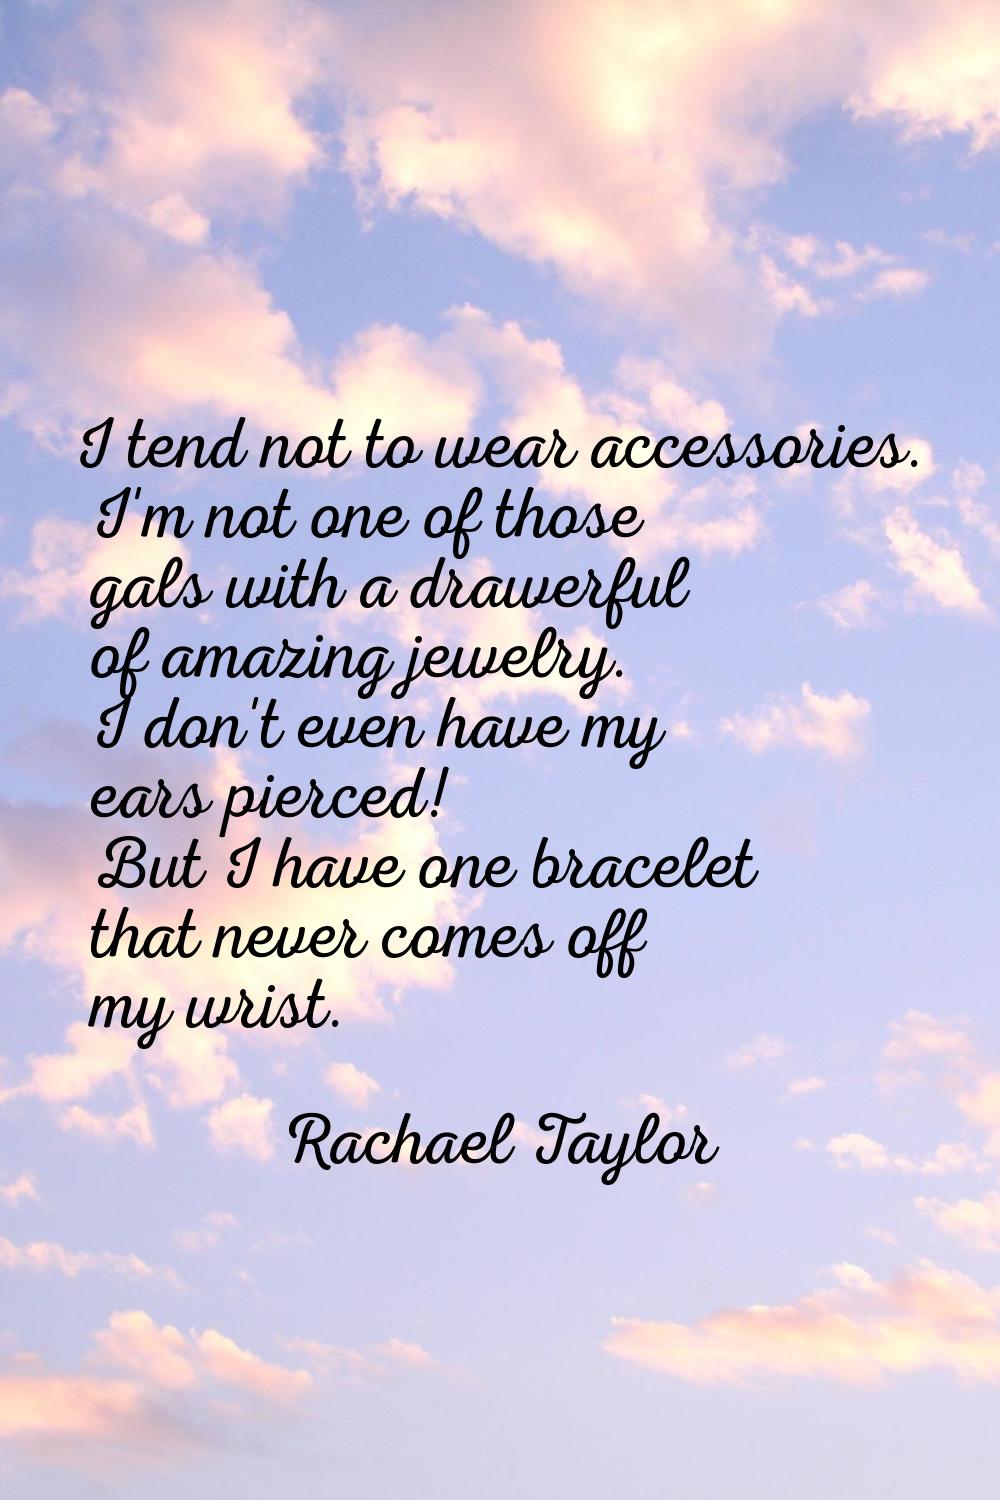 I tend not to wear accessories. I'm not one of those gals with a drawerful of amazing jewelry. I do